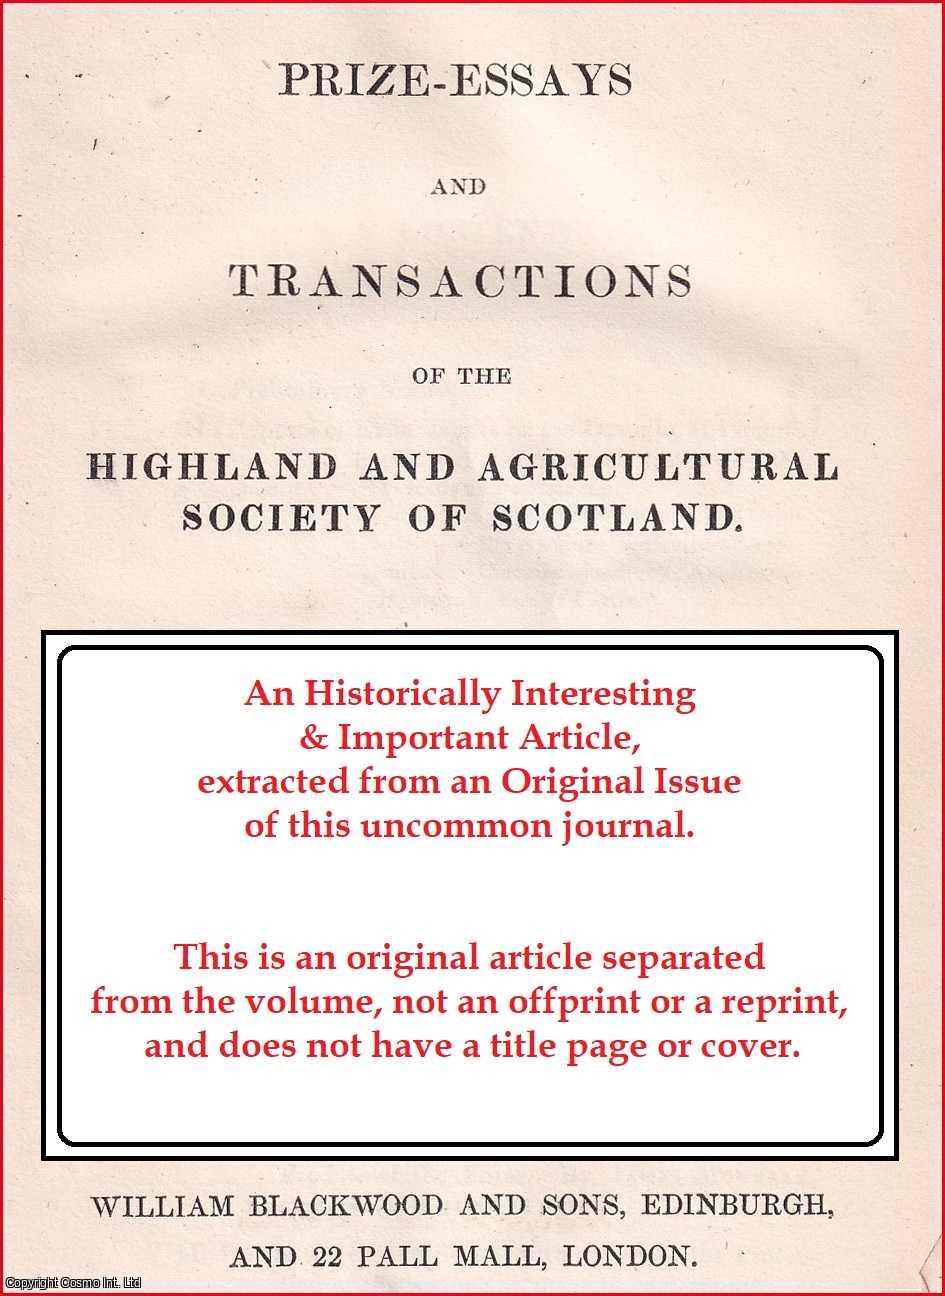 Mr. Hugh Munro, Assynt, by Evanton, Ross-shire. - The Cultivation of Turnips with Compost Applied in a Peculiar Manner. An uncommon original article from the Prize Essays and Transactions of the Highland Society of Scotland, 1835.